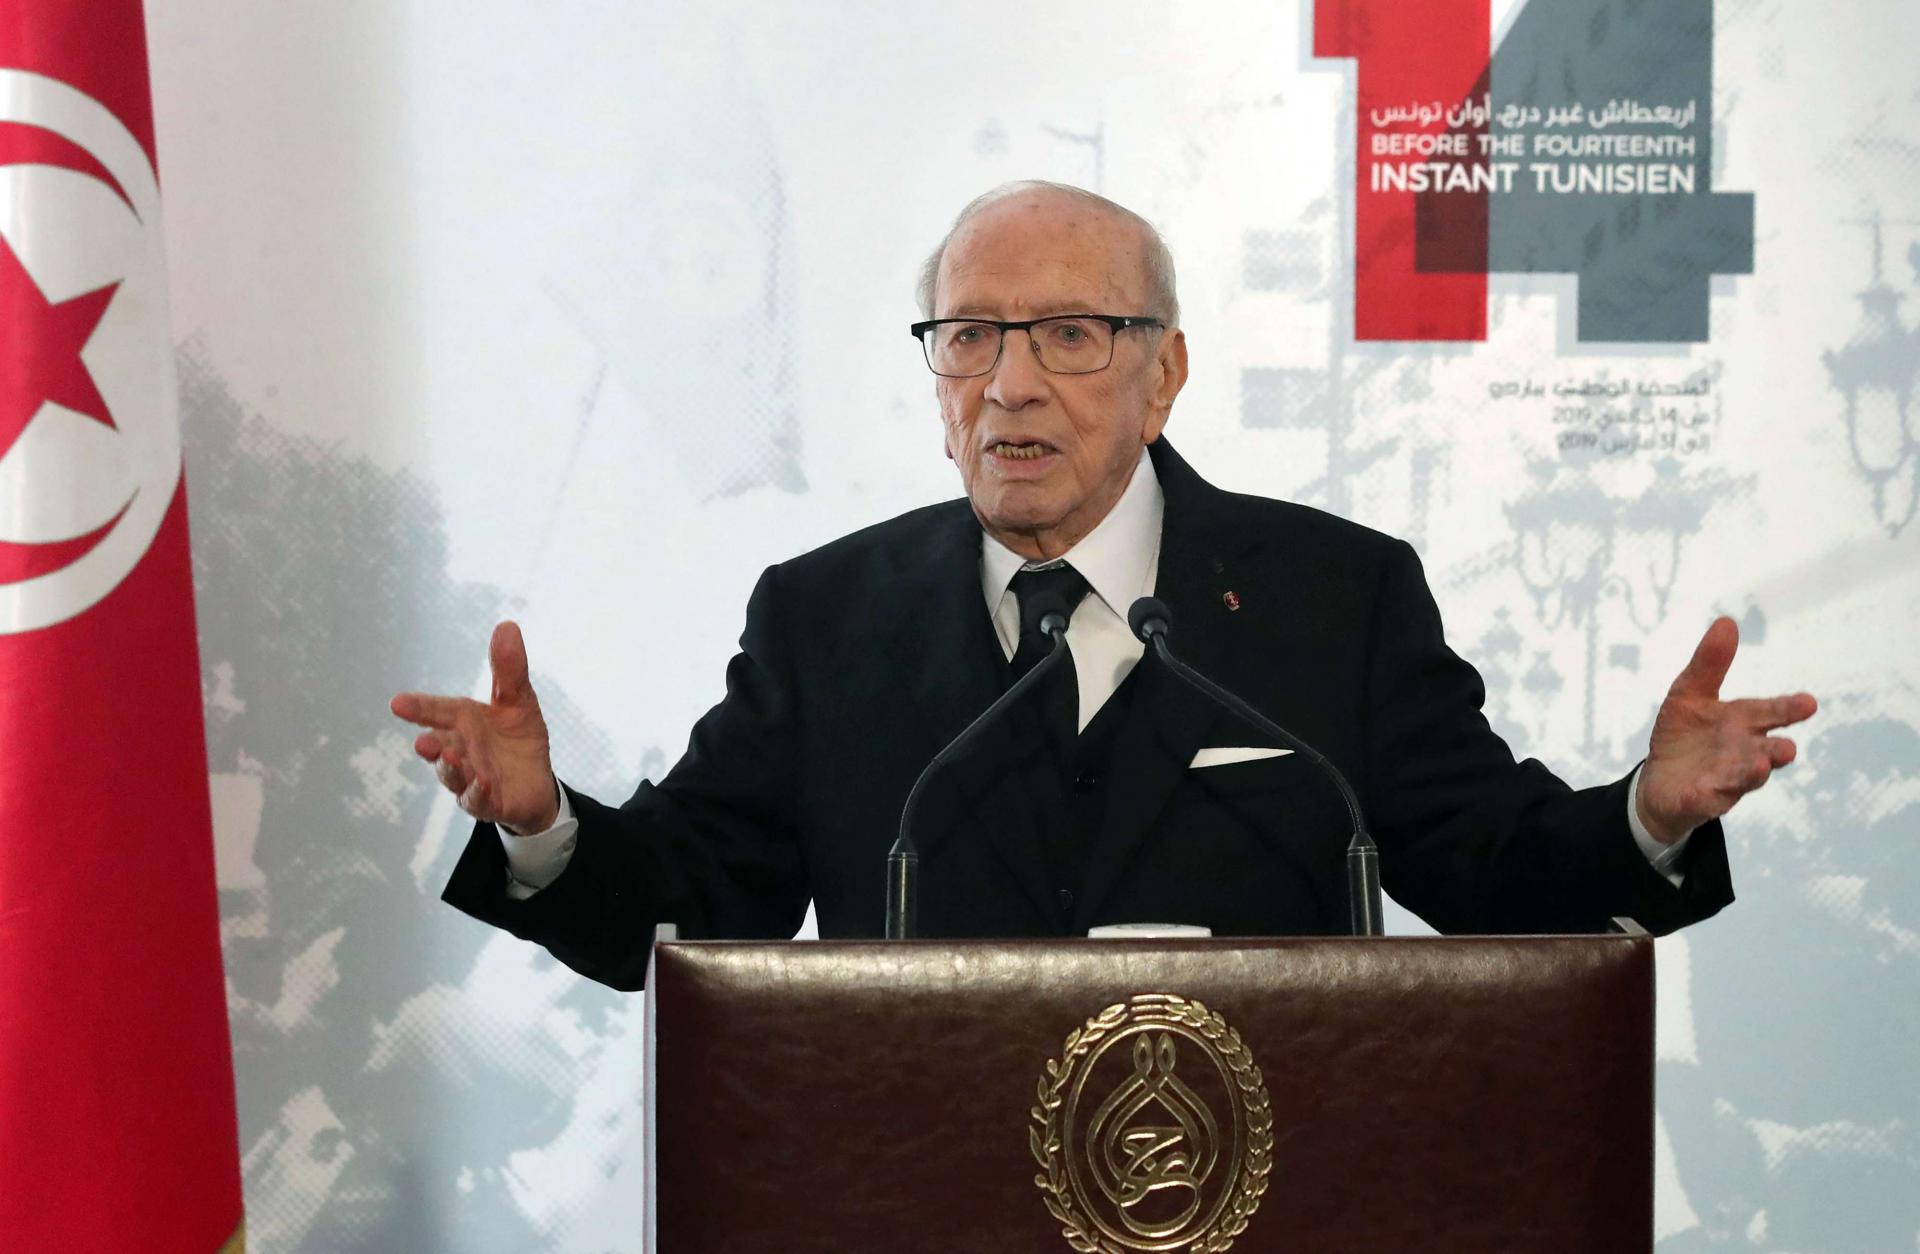 92-year-old Essebsi is Tunisia's first democratically elected president